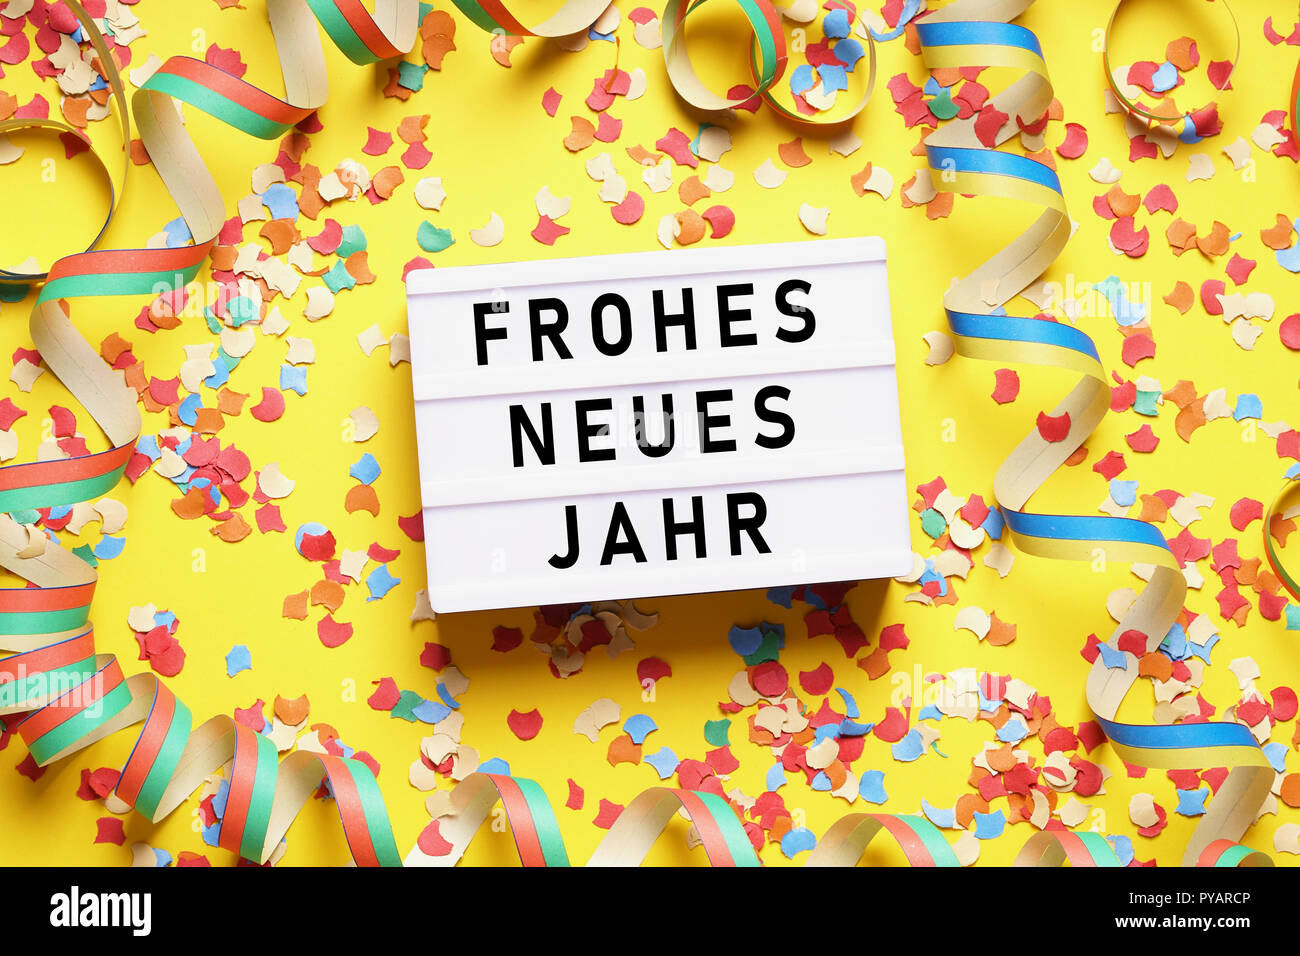 Frohes neues Jahr means happy new year in German Stock Photo